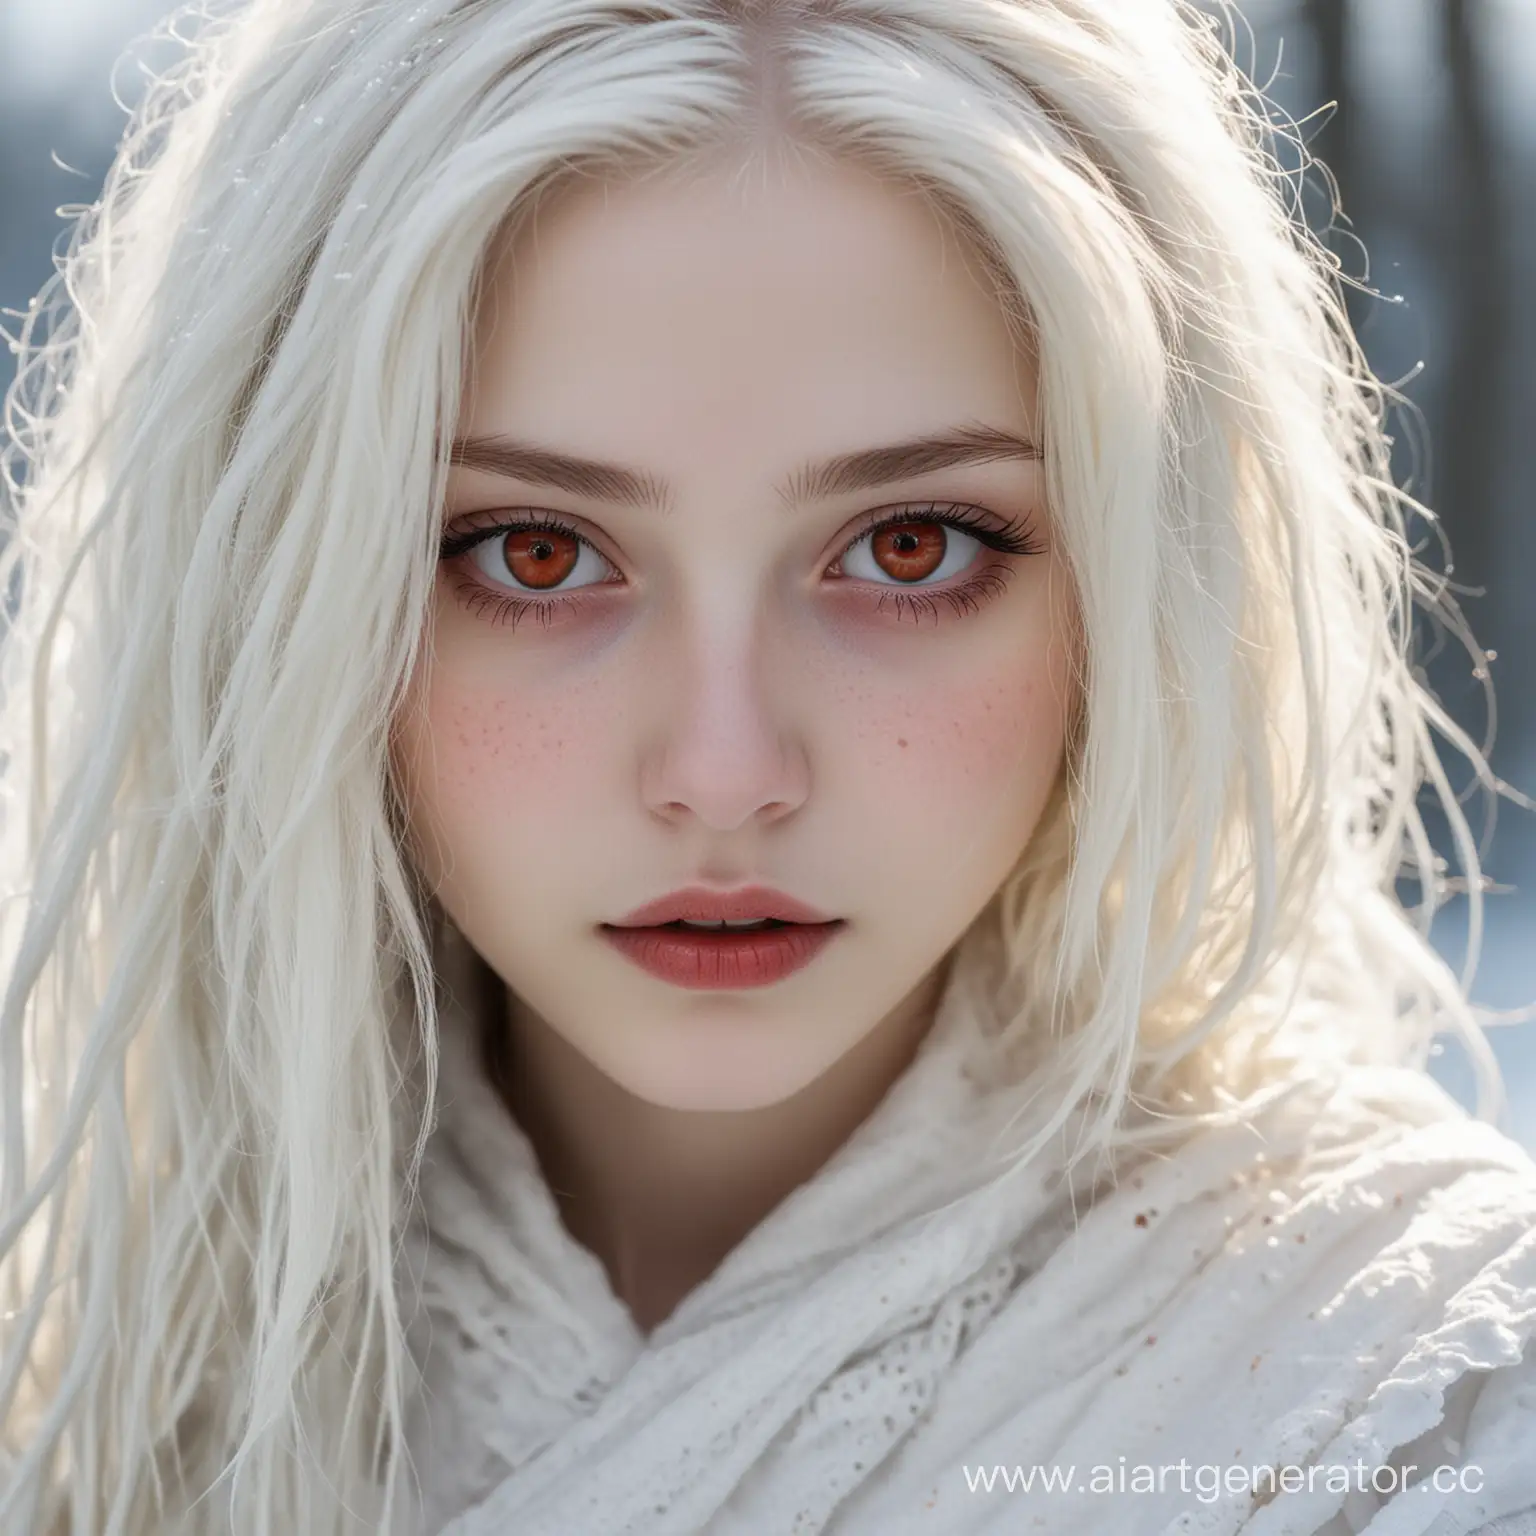 A pretty young girl. 22 years old. Her skin is pale, like a doll's. Her hair is white as snow and falls below her shoulder. Bright blood-red eyes. Her whole image seems both fascinating and frightening at the same time.